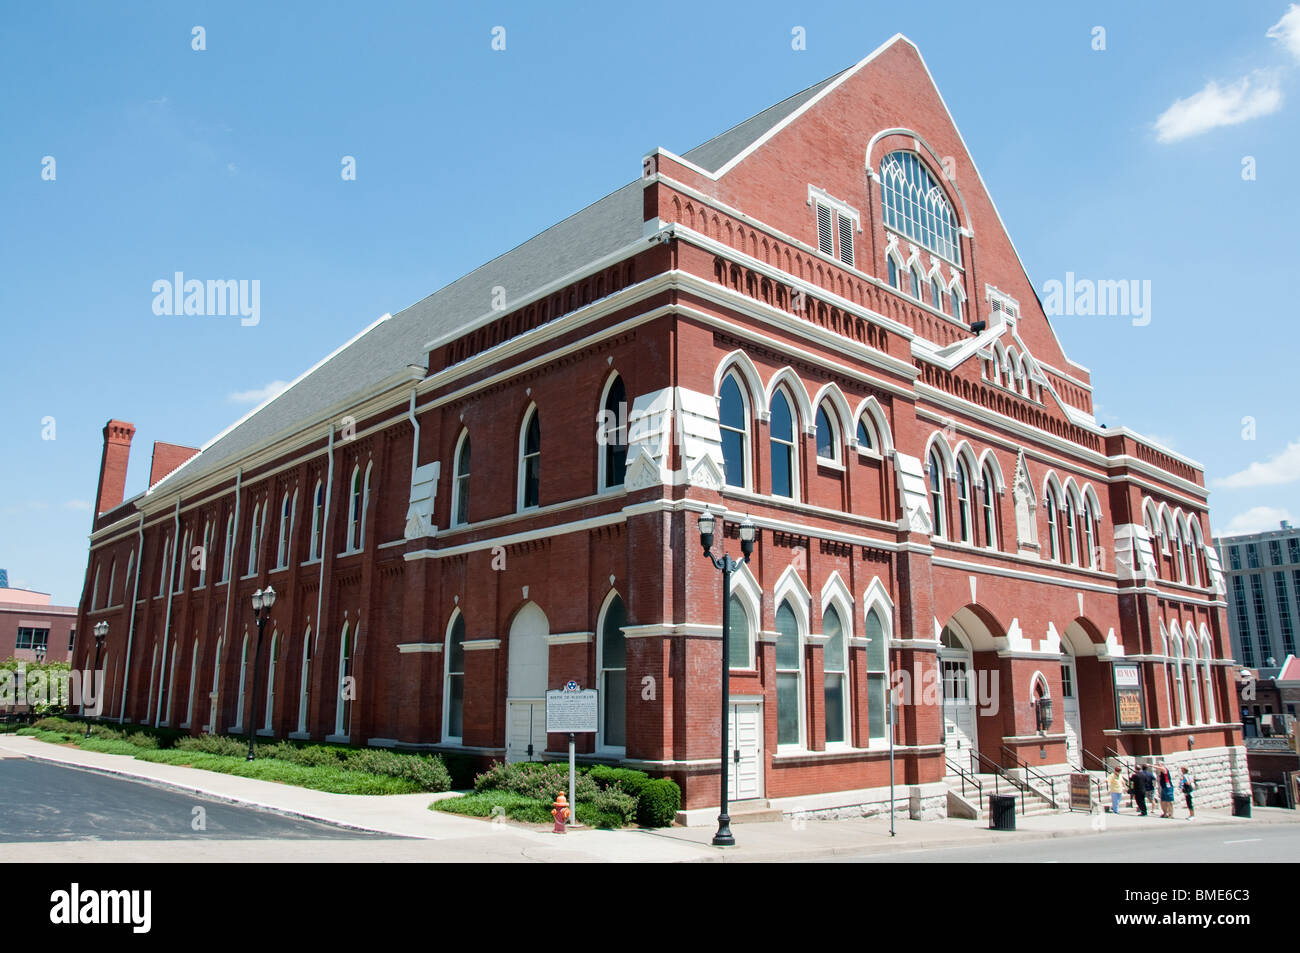 Outside view of Ryman Auditorium in Nashville, Tennessee Stock Photo